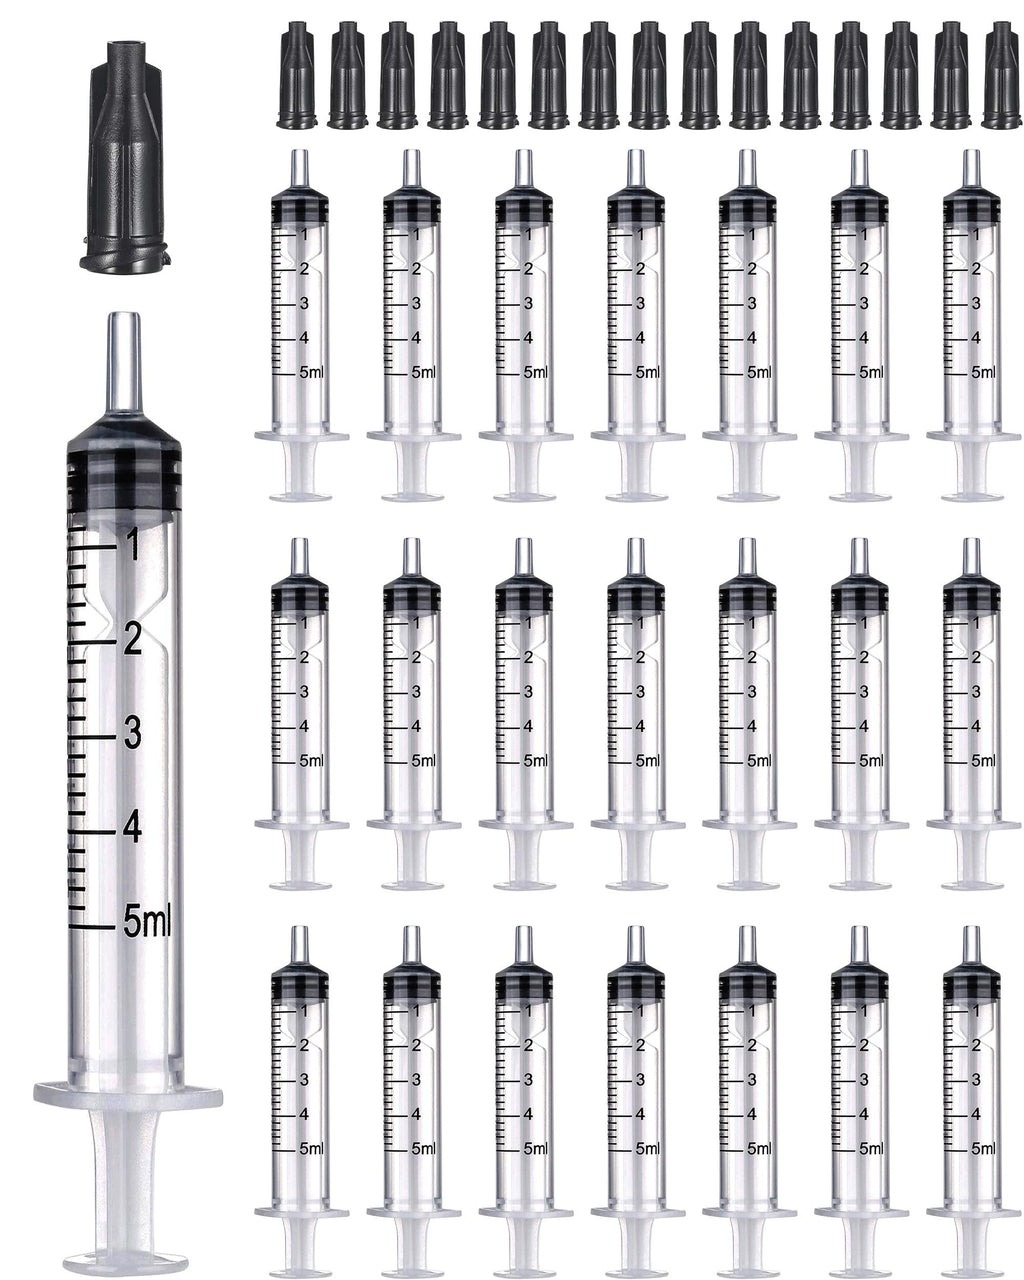  [AUSTRALIA] - 40 Pack 5ML Plastic Syringe Luer Slip with Cap, Great for Measuring, Refilling Watering and Pets Feeding(Non-sterile) (5ML)